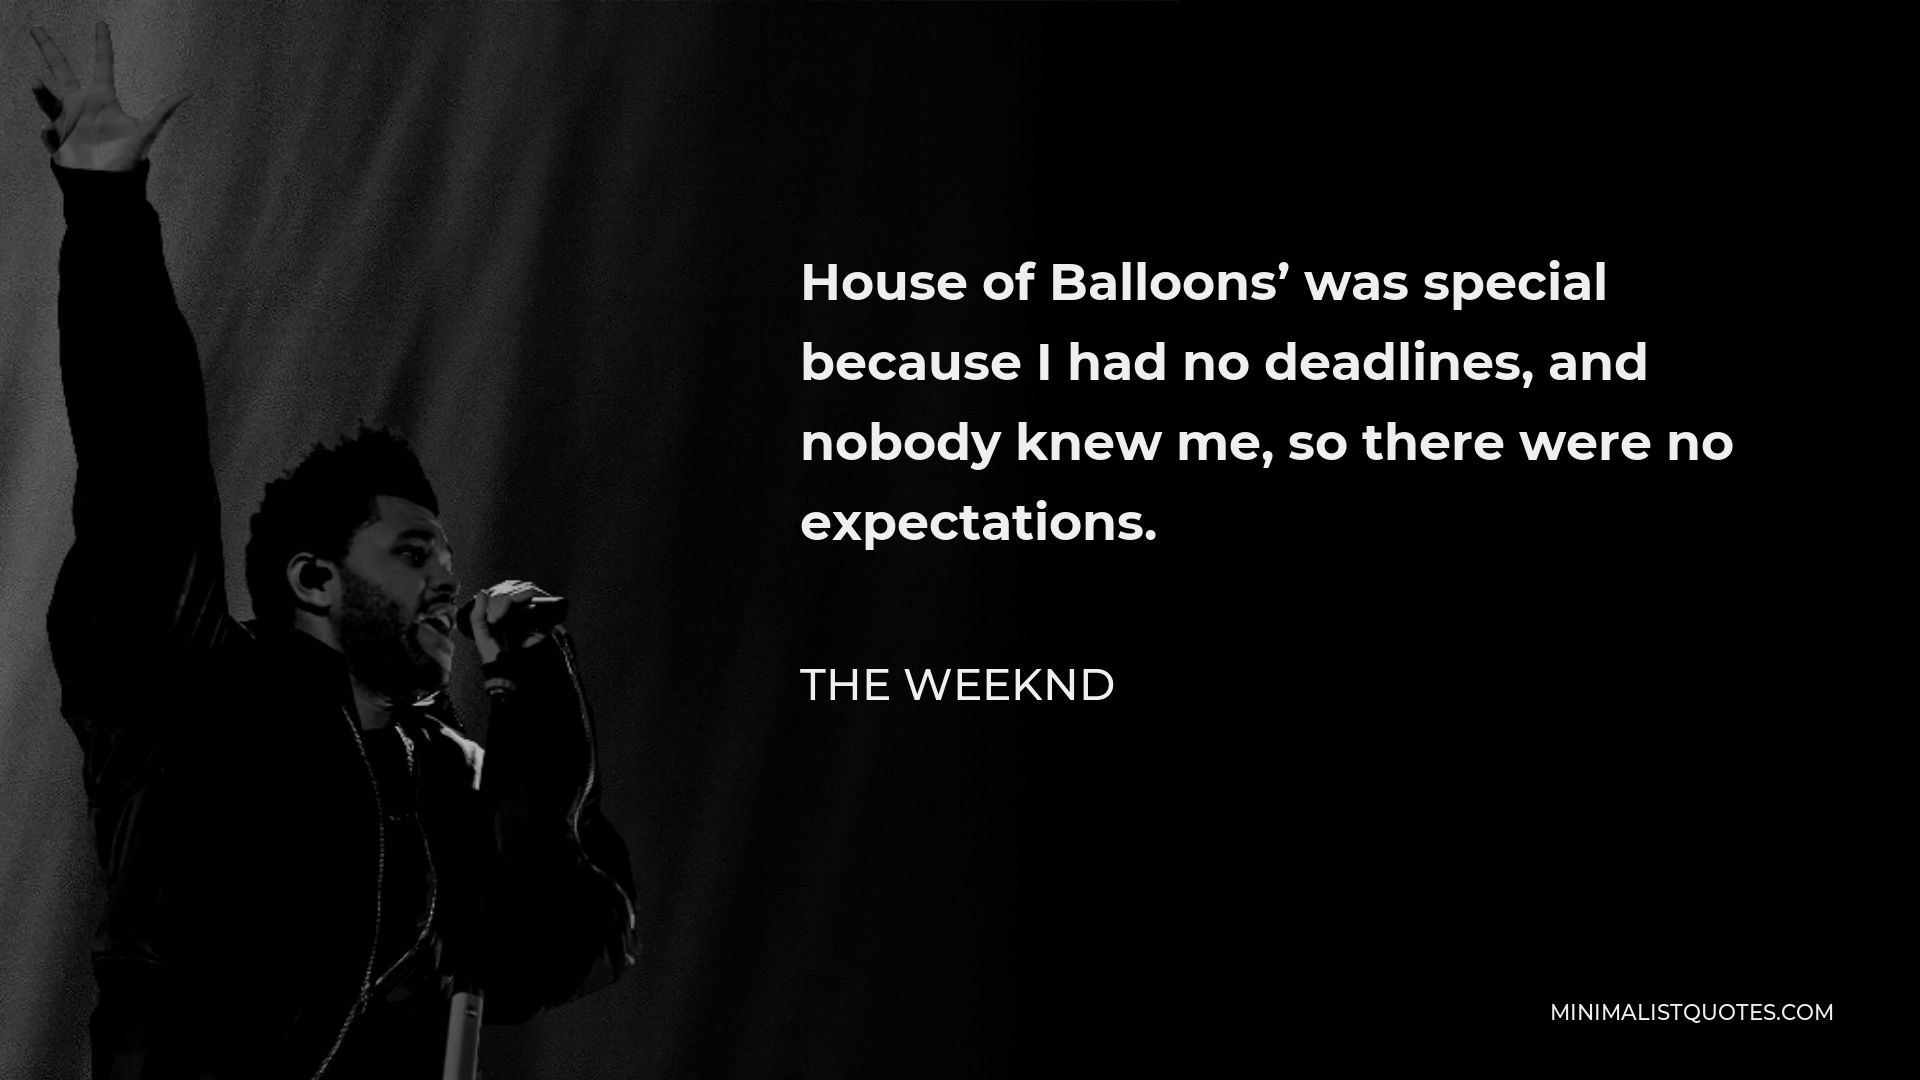 The Weeknd Quote - House of Balloons’ was special because I had no deadlines, and nobody knew me, so there were no expectations.